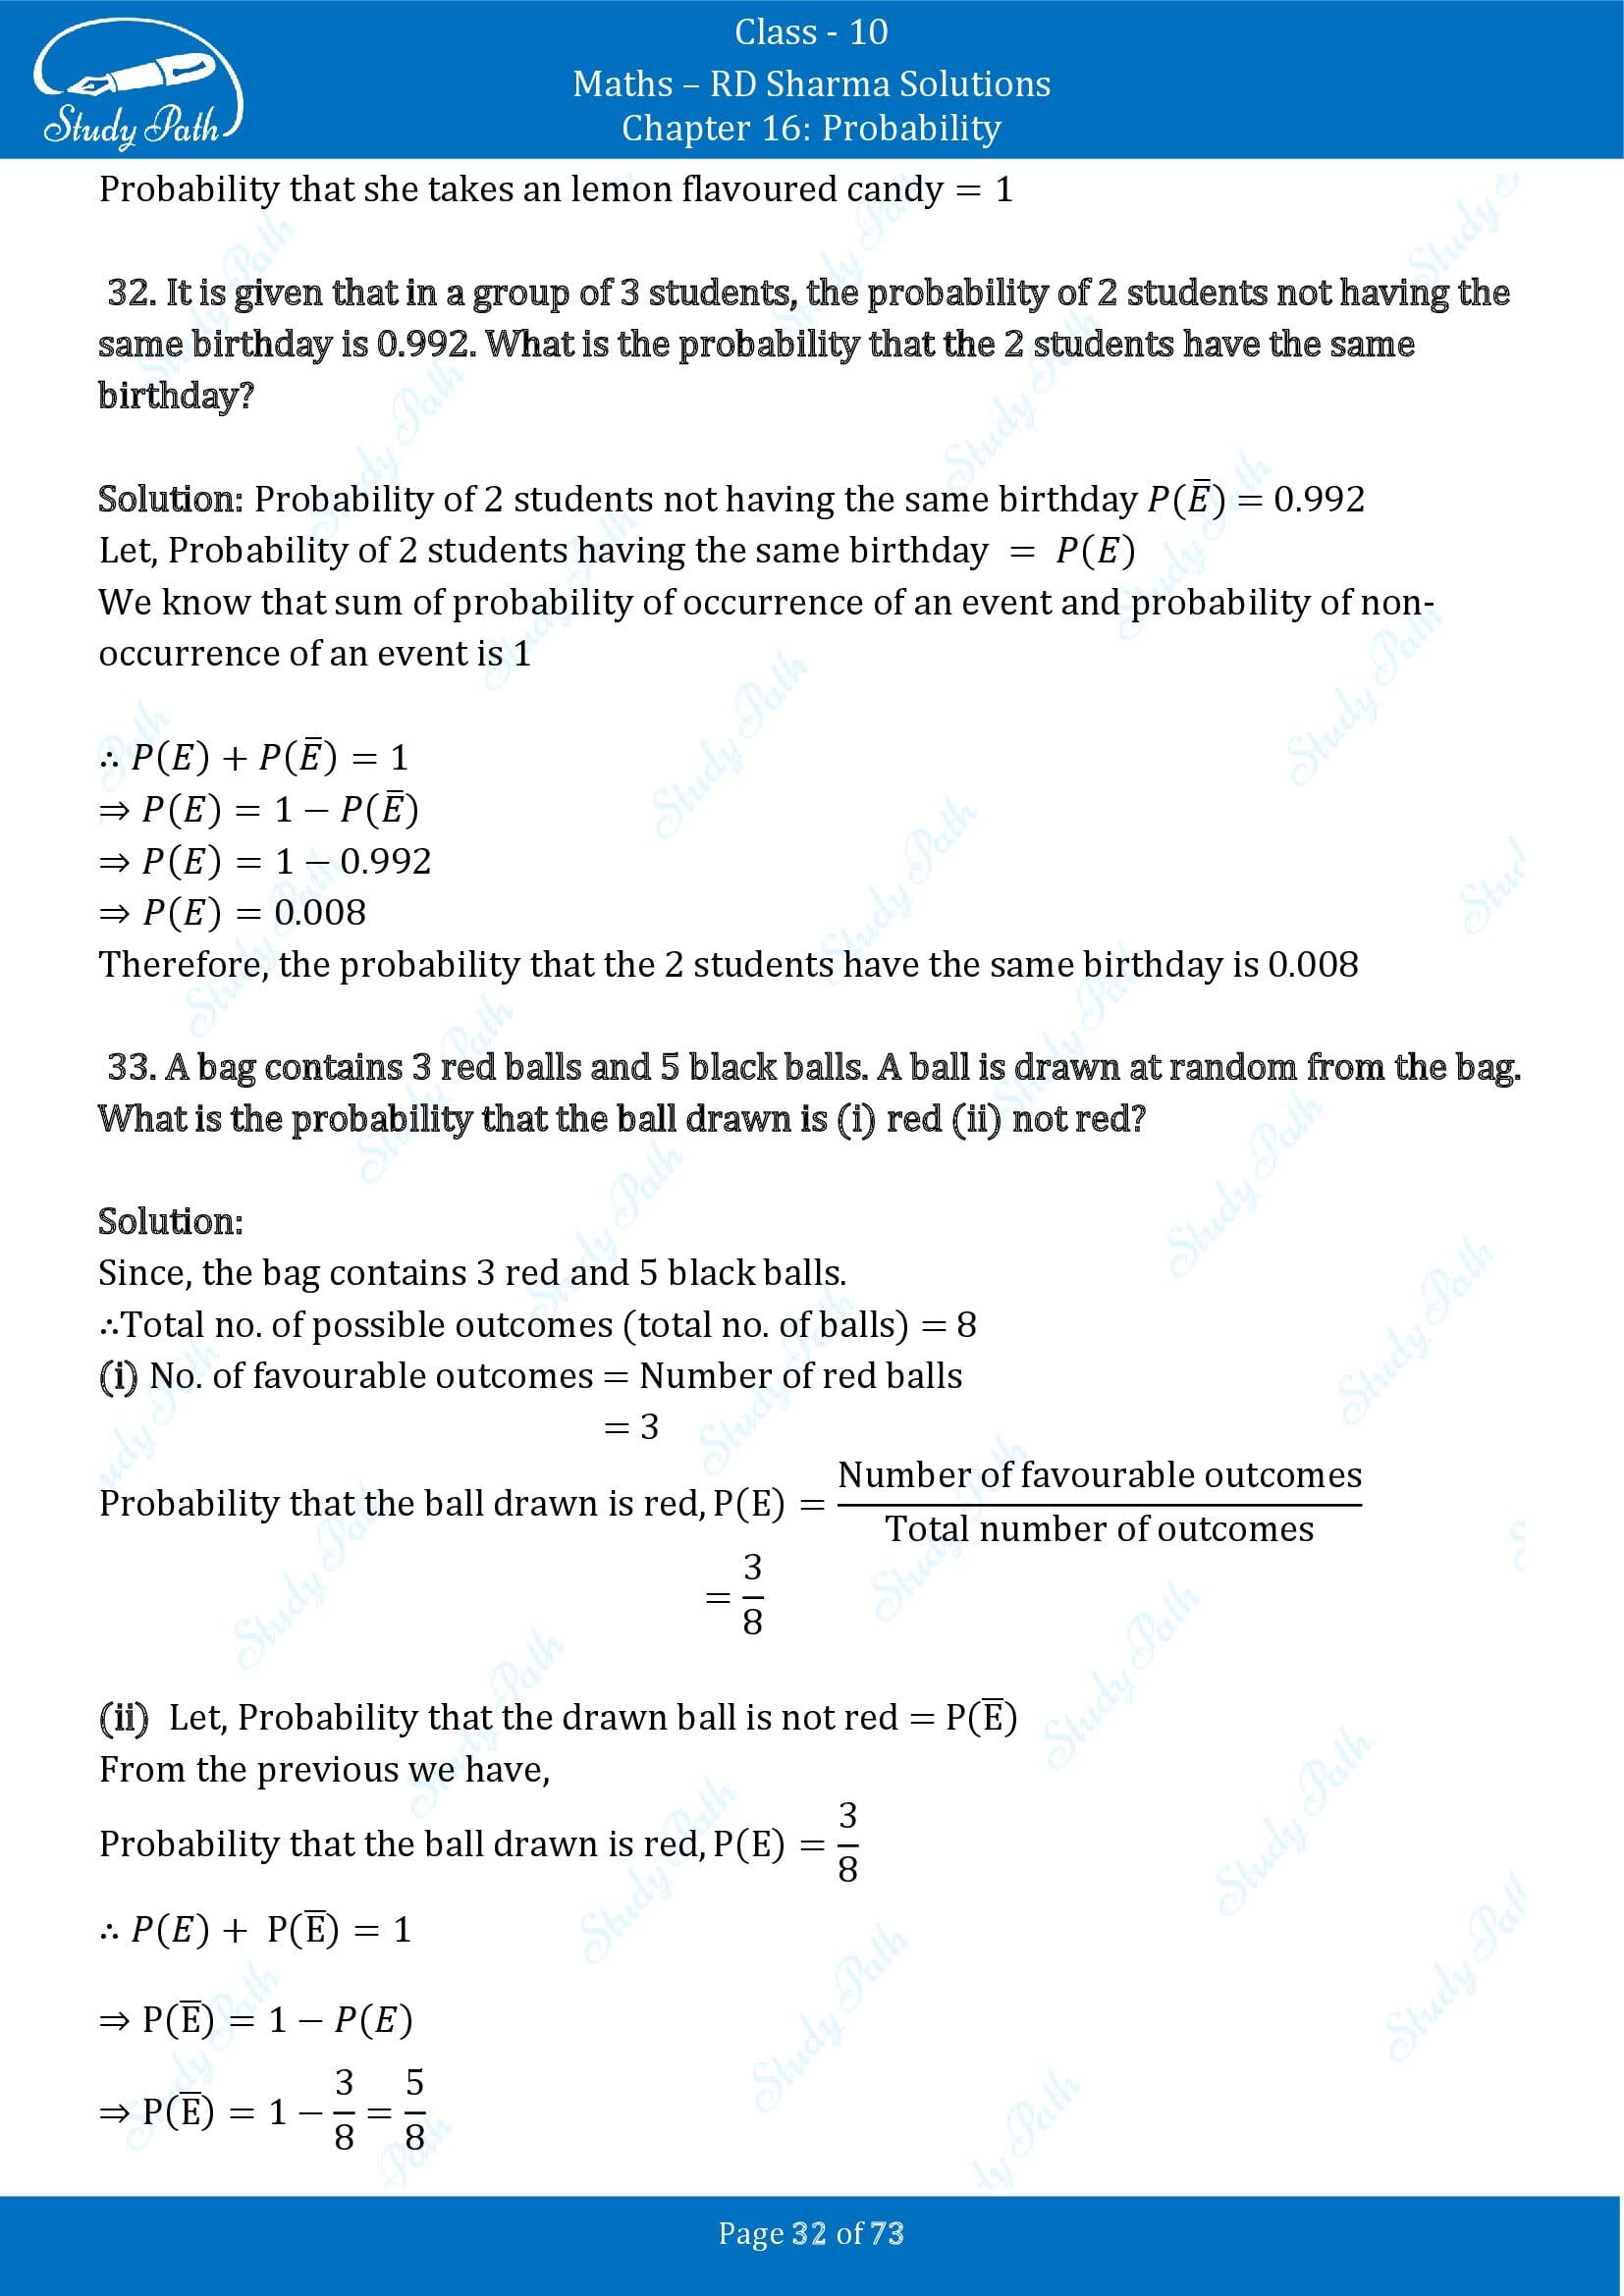 RD Sharma Solutions Class 10 Chapter 16 Probability Exercise 16.1 00032